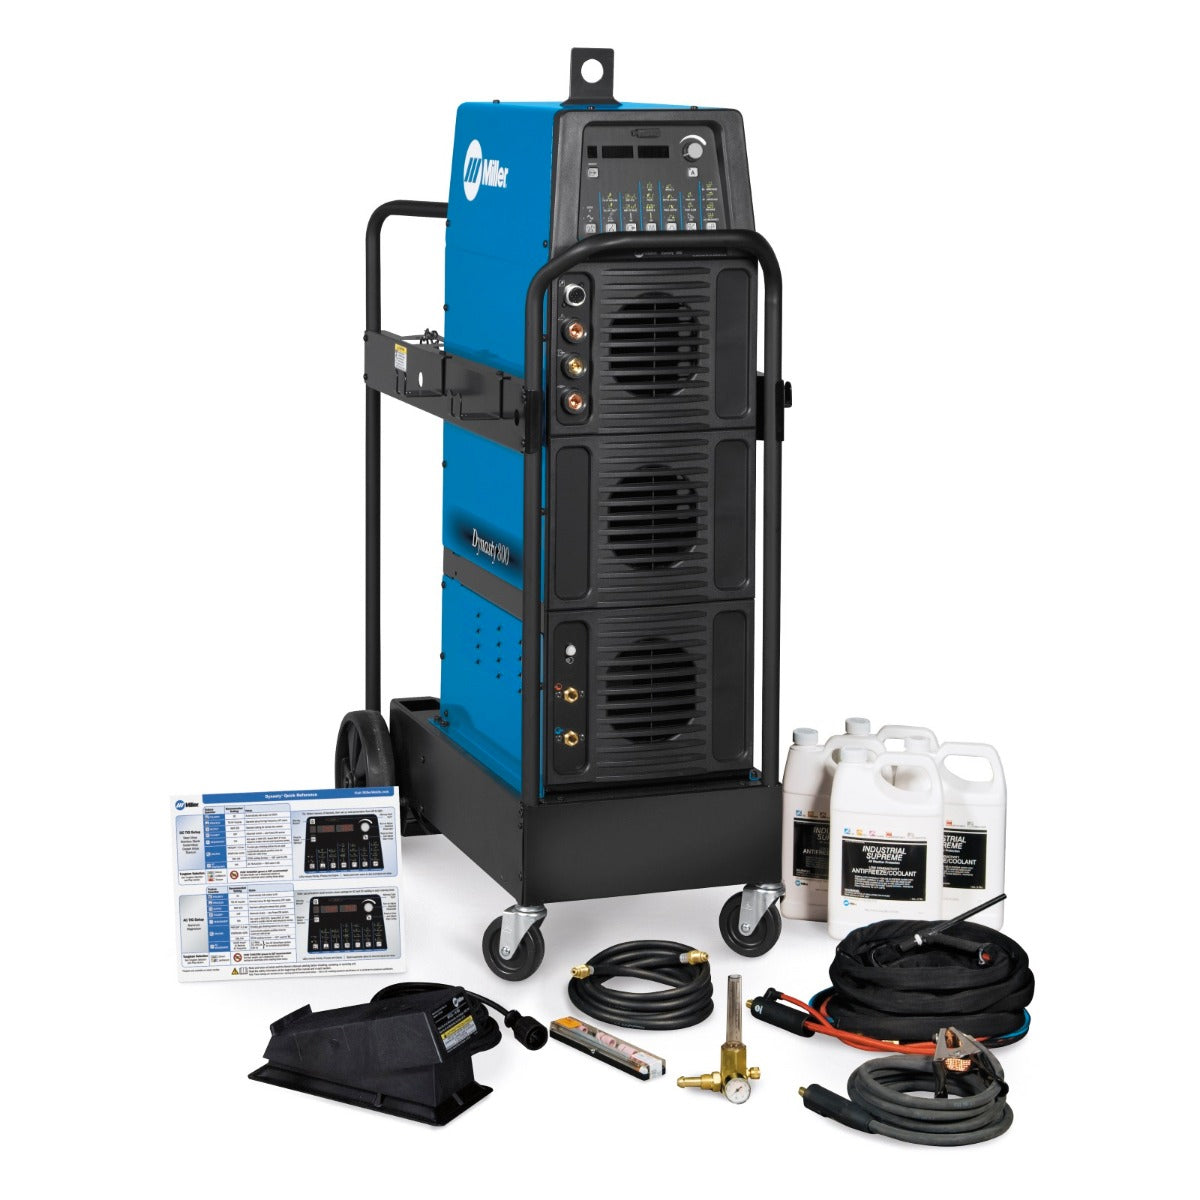 Miller Dynasty 800 TIG Welder and Water-Cooled Package with Foot Control (951696)